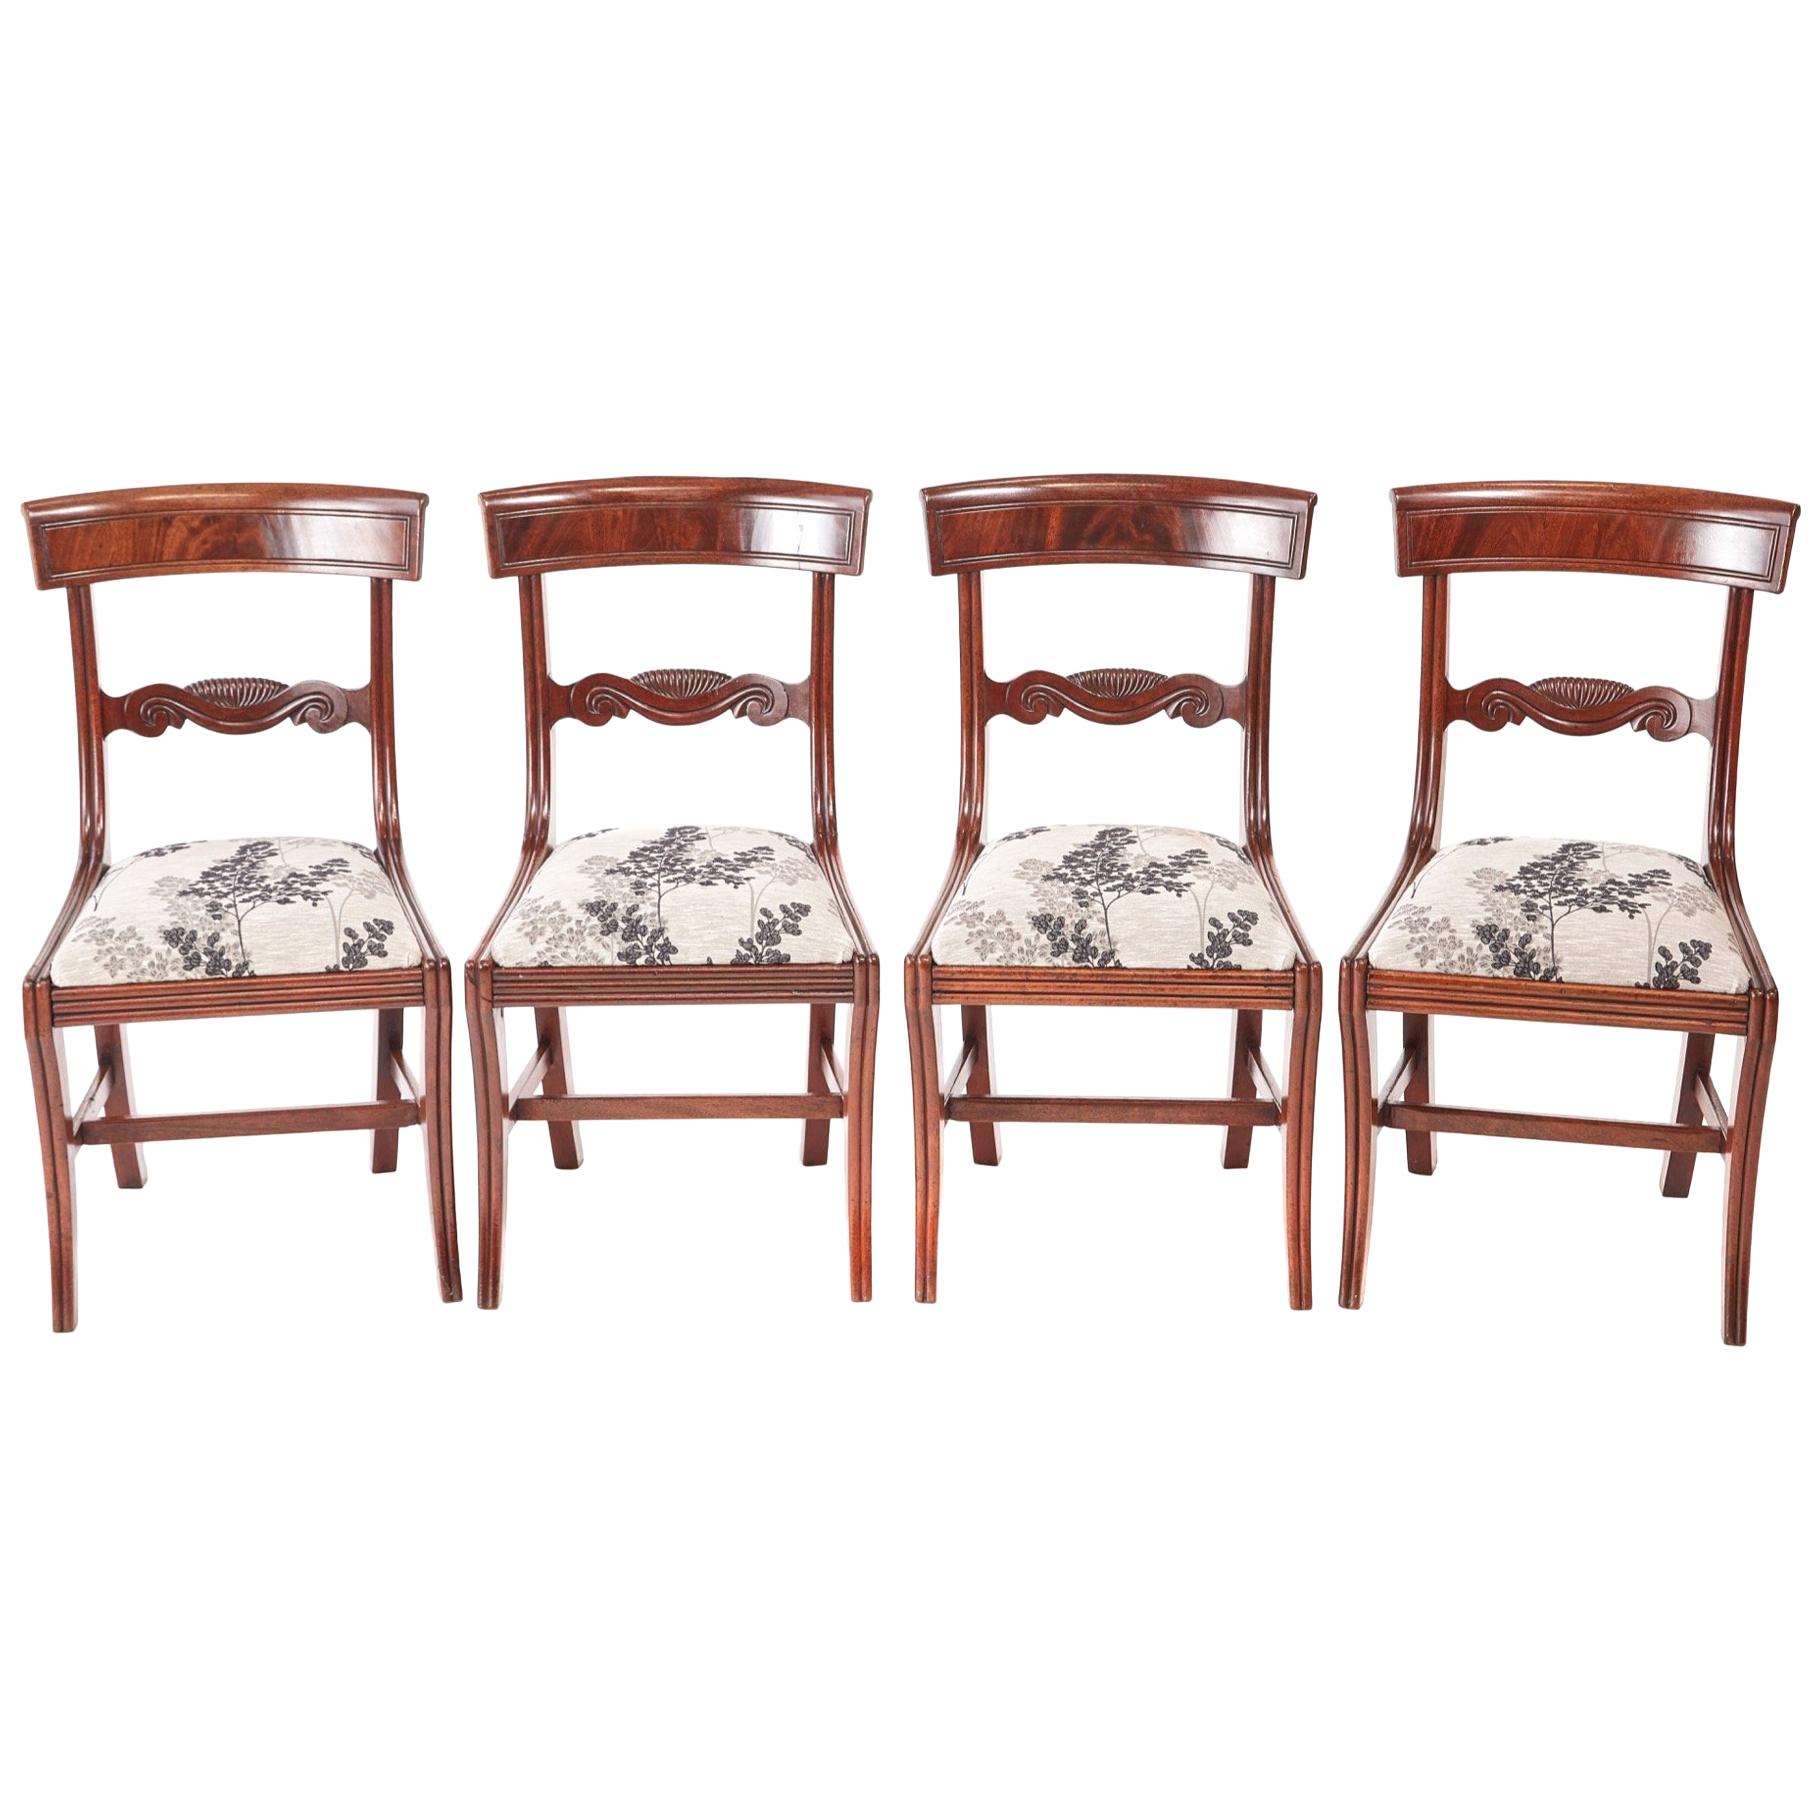 Quality Set of Four Regency Mahogany Dining Chairs